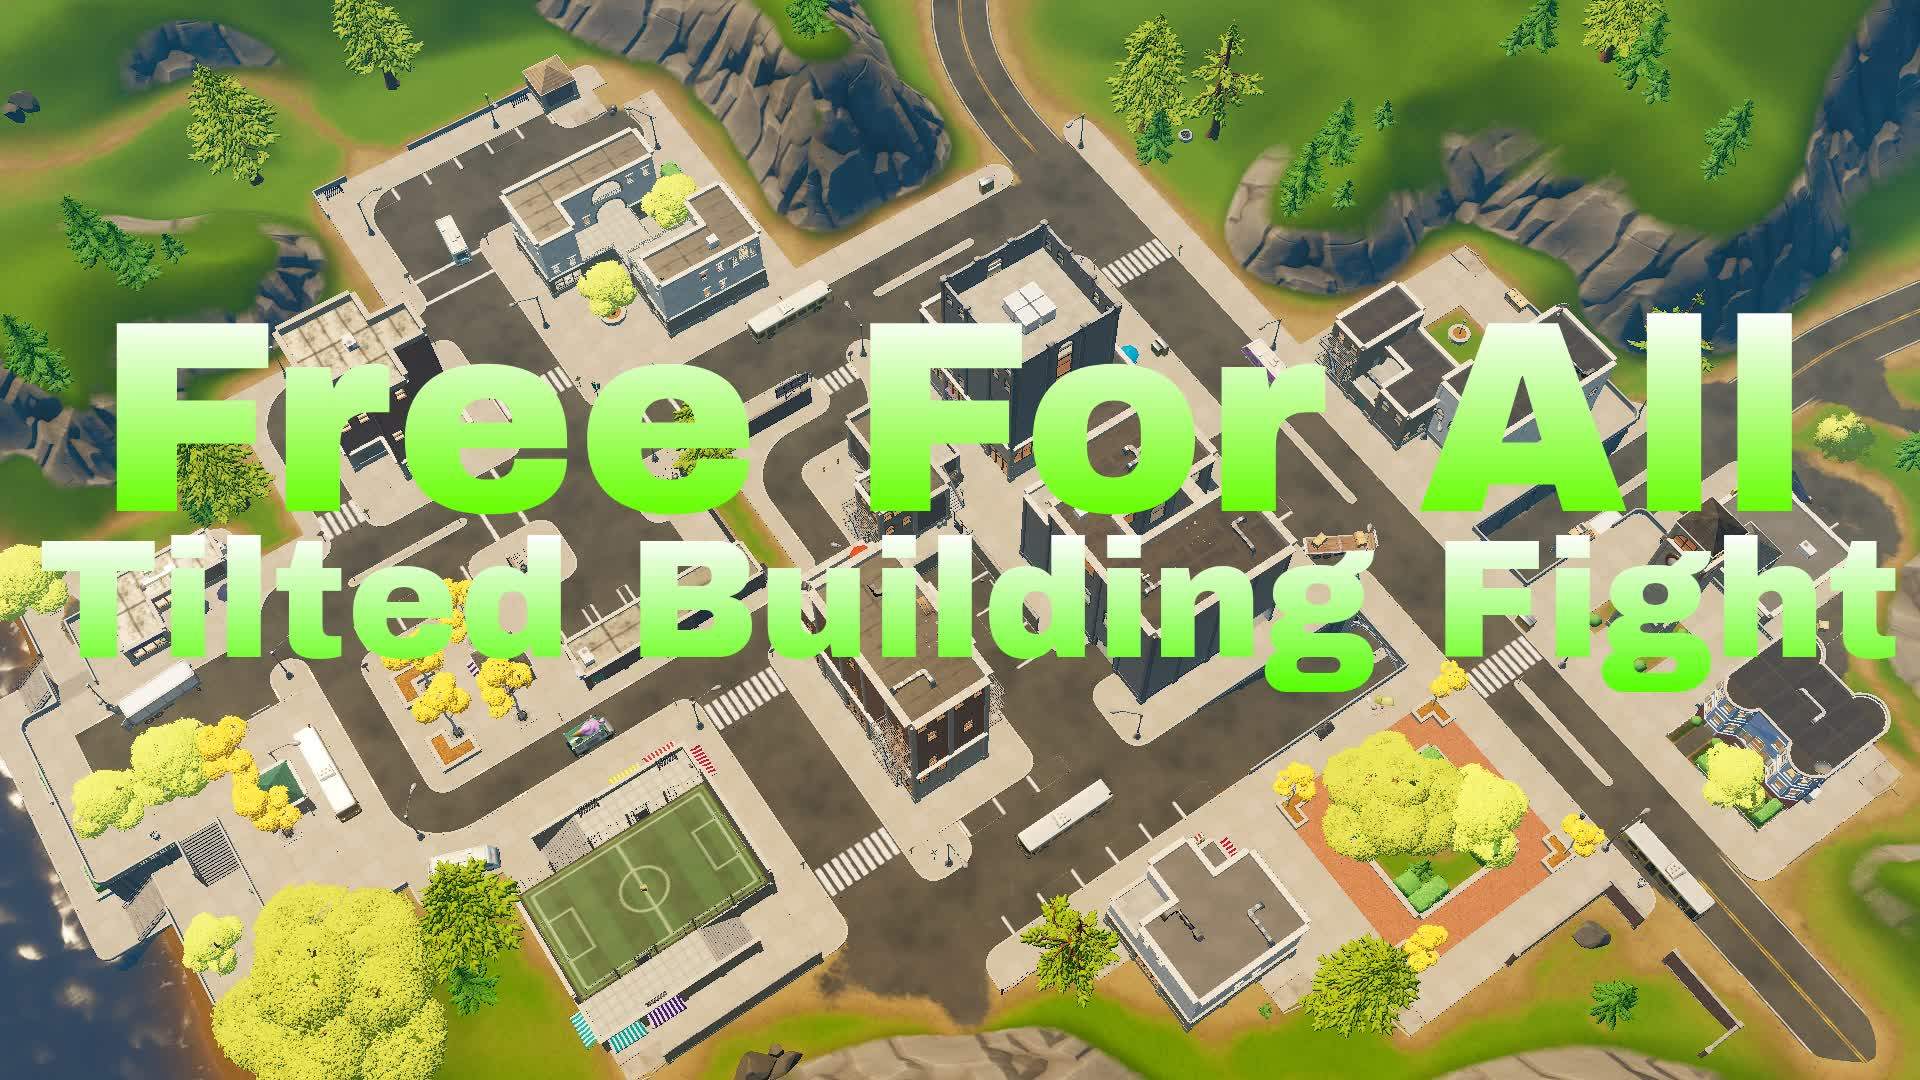 Free For All Tilted Building Fight